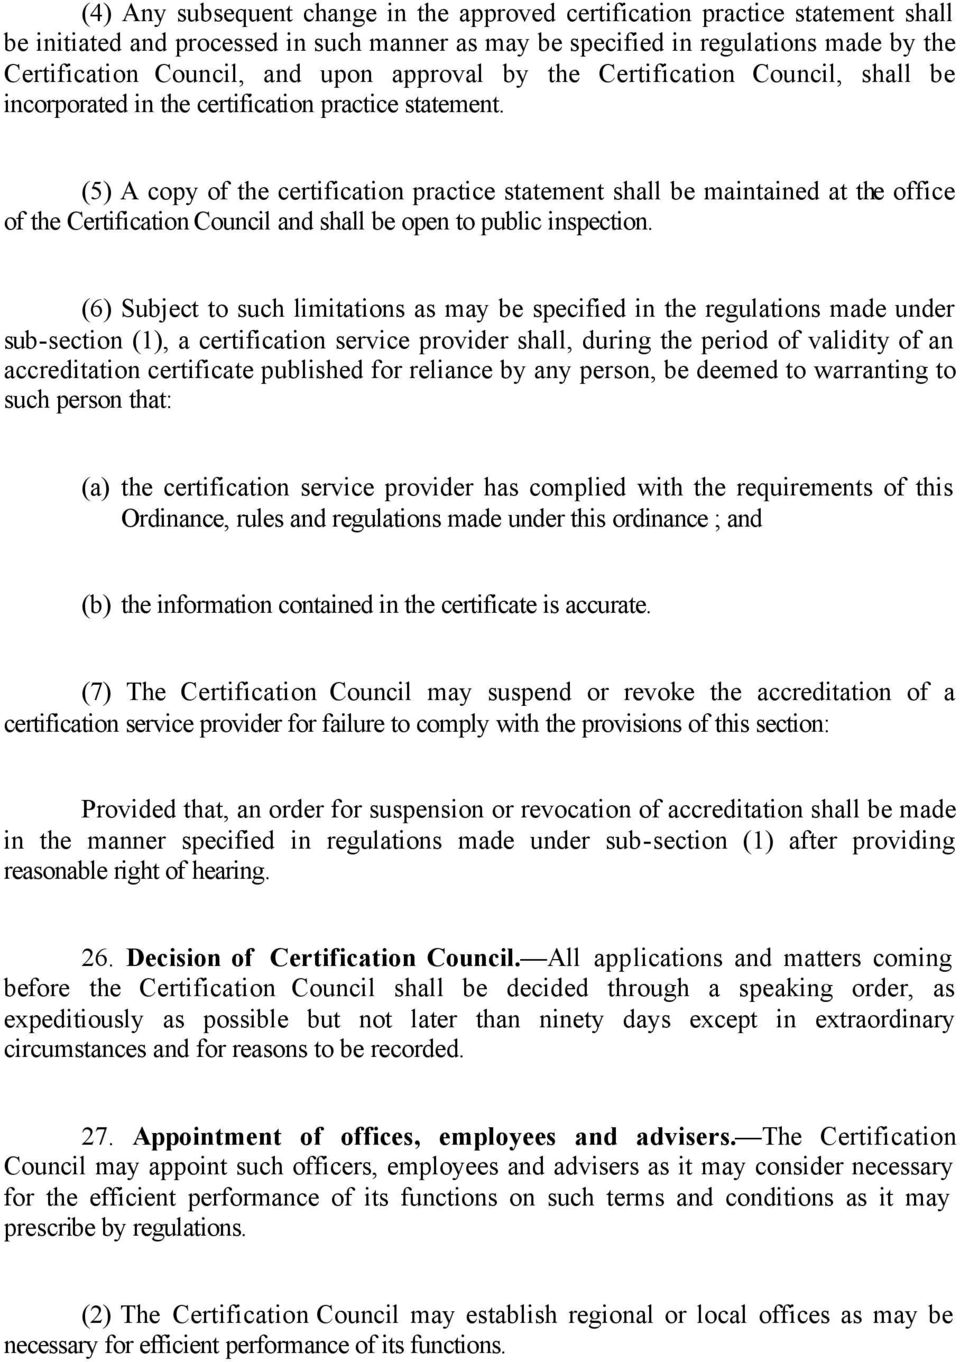 (5) A copy of the certification practice statement shall be maintained at the office of the Certification Council and shall be open to public inspection.